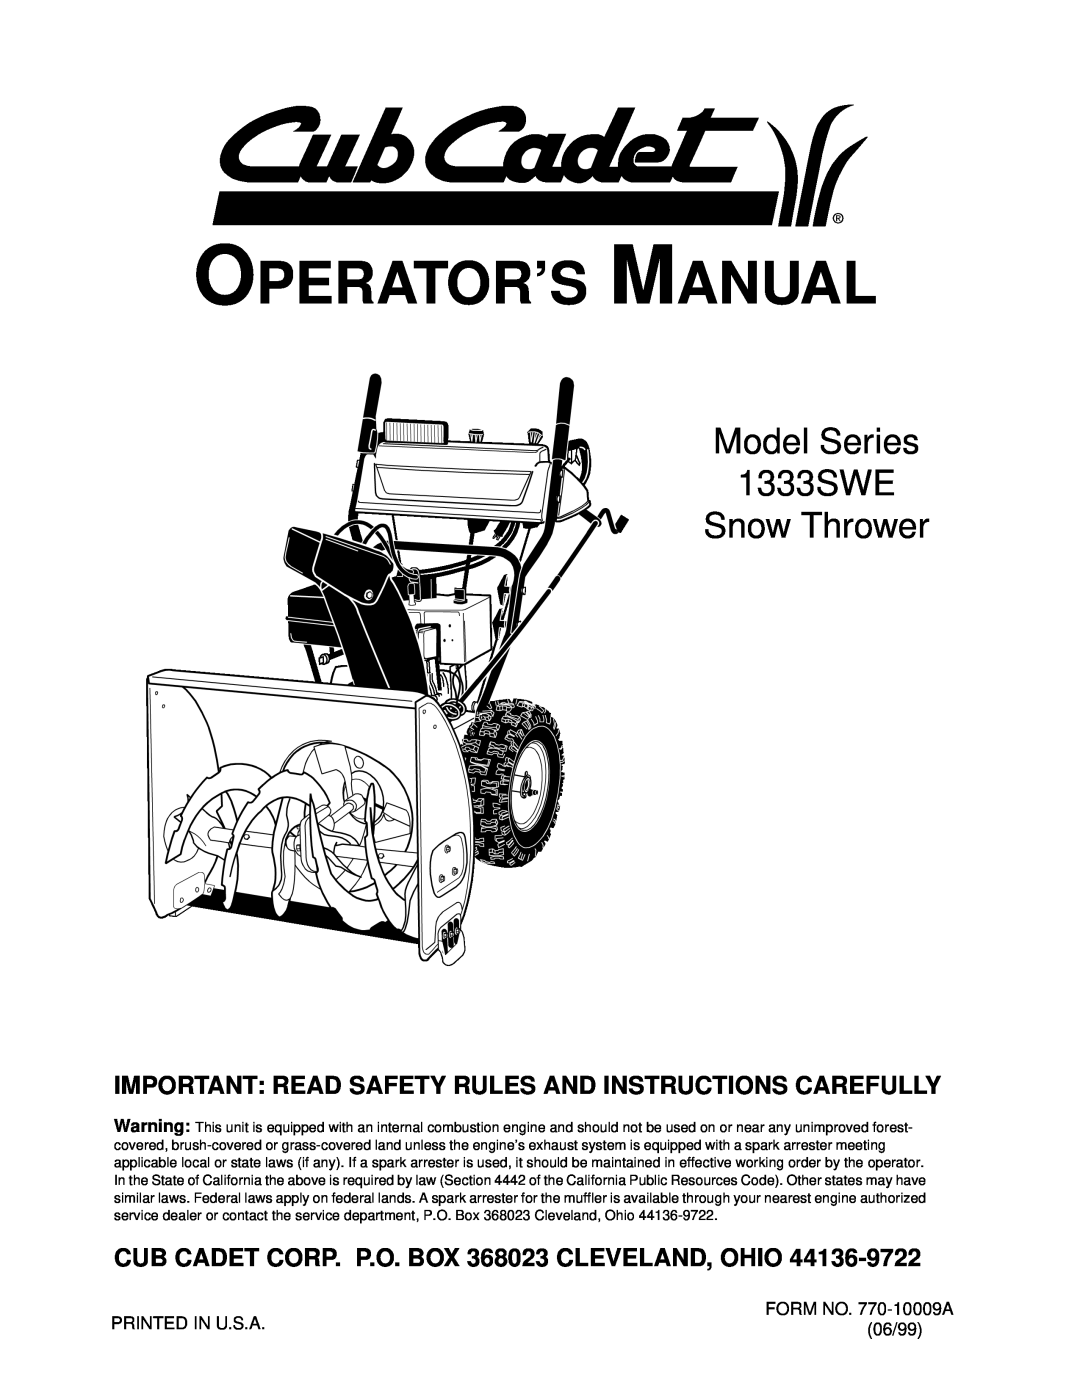 Cub Cadet 1333 SWE manual Important Read Safety Rules And Instructions Carefully, Operator’S Manual 